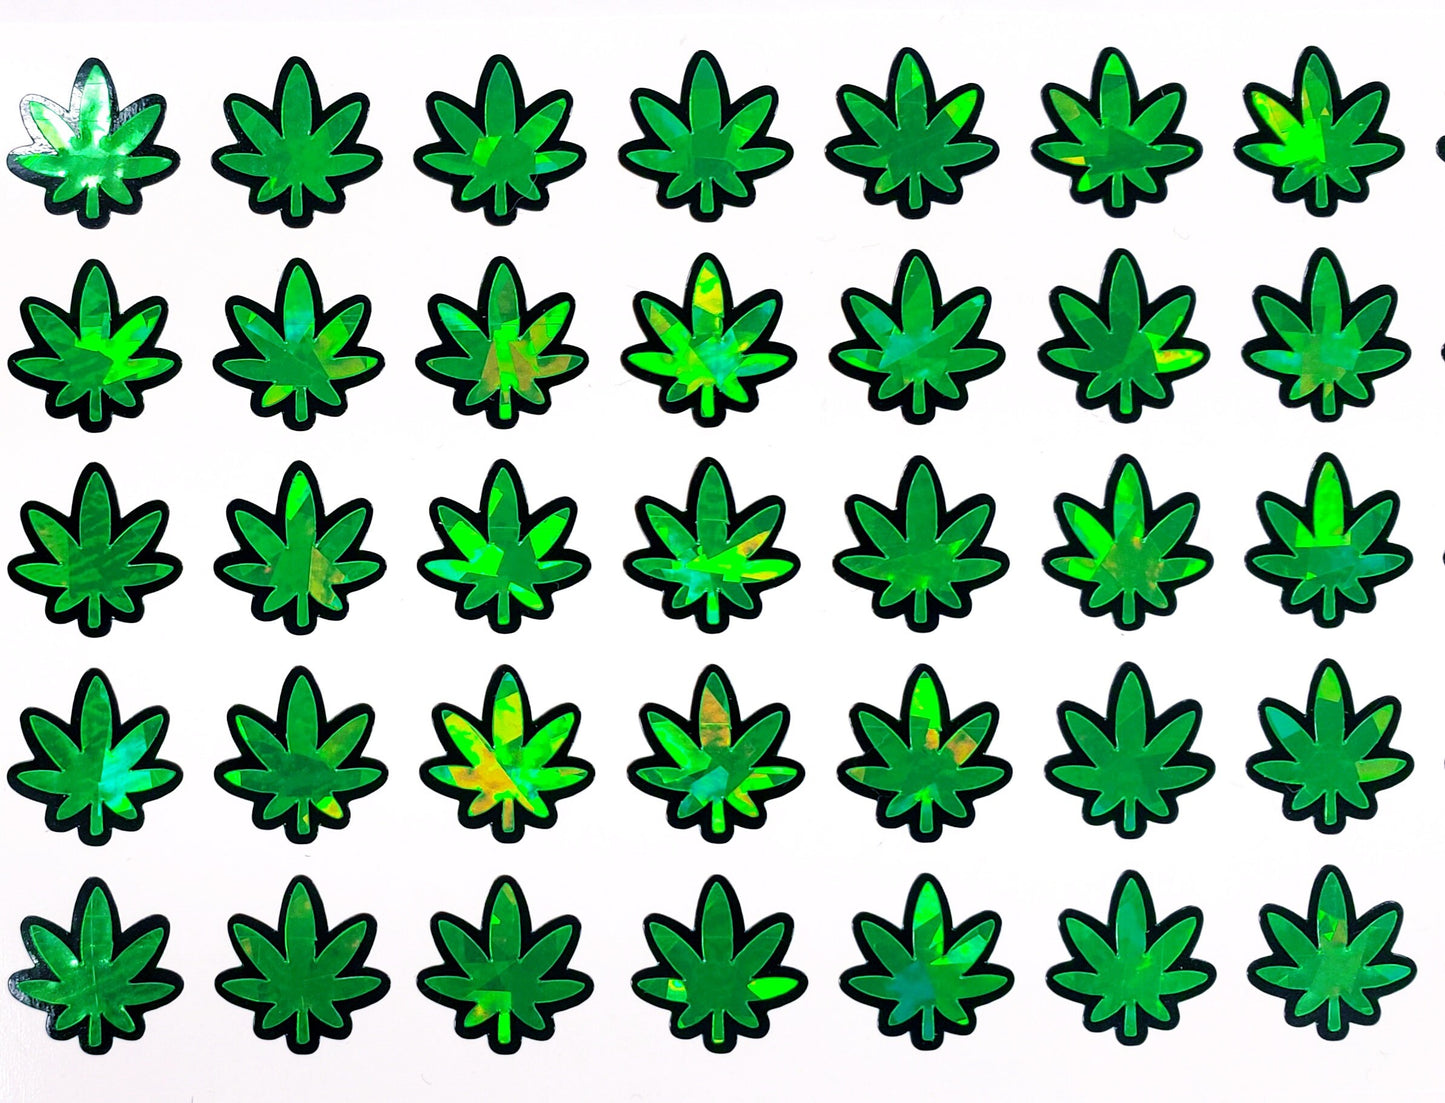 Pot Leaf Stickers, set of 30 green & black sparkle cannabis leaf decals, pot leaf weed stickers to label edibles containers, food warning.